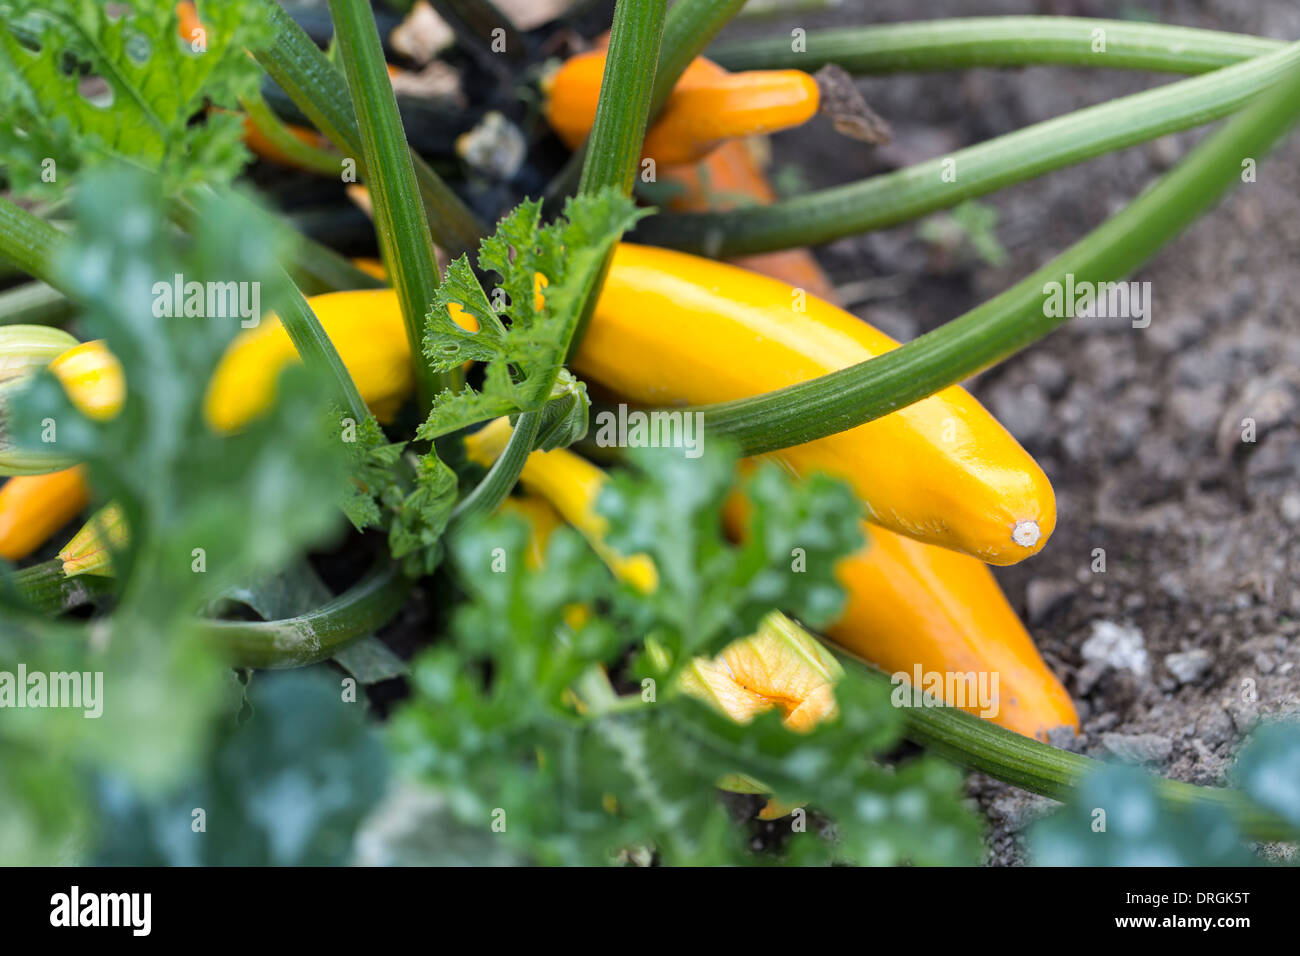 Yellow zucchini in the garden bed just before harvest Stock Photo